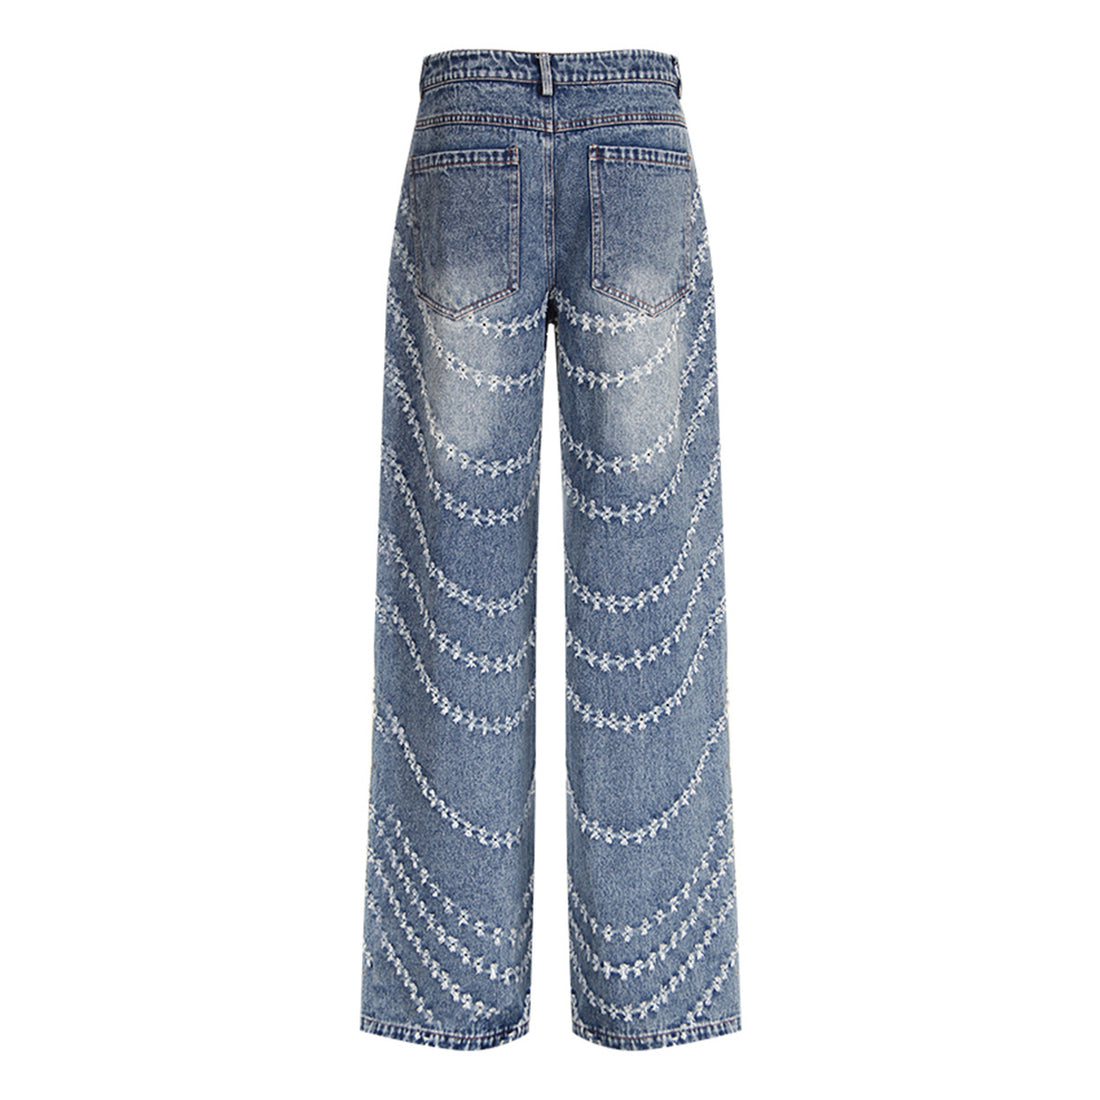 Fried Street Ripped Jeans